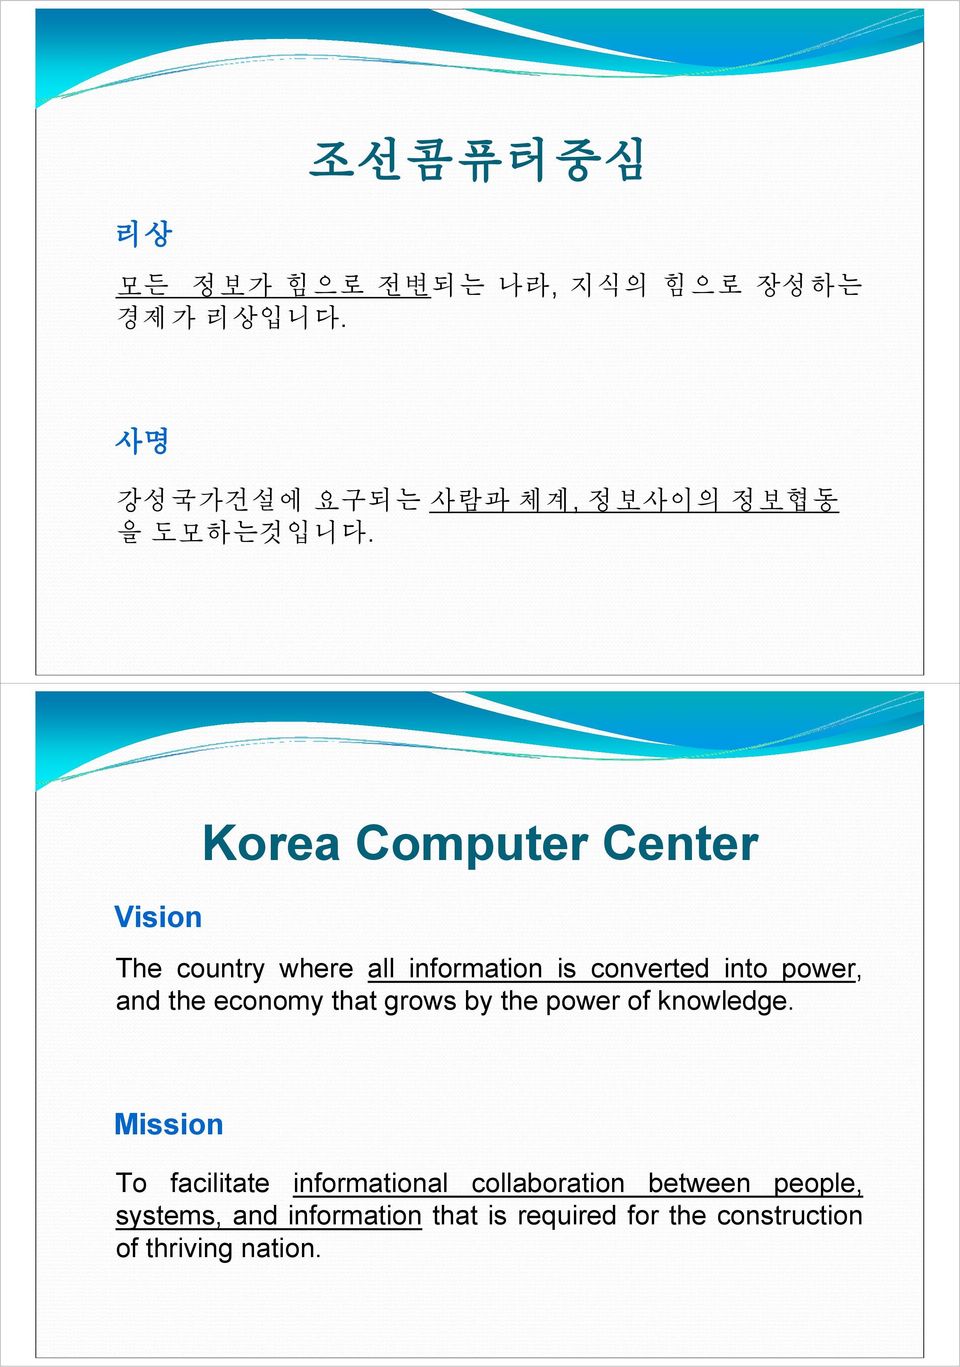 Vision Korea Computer Center The country where all information is converted into power, and the